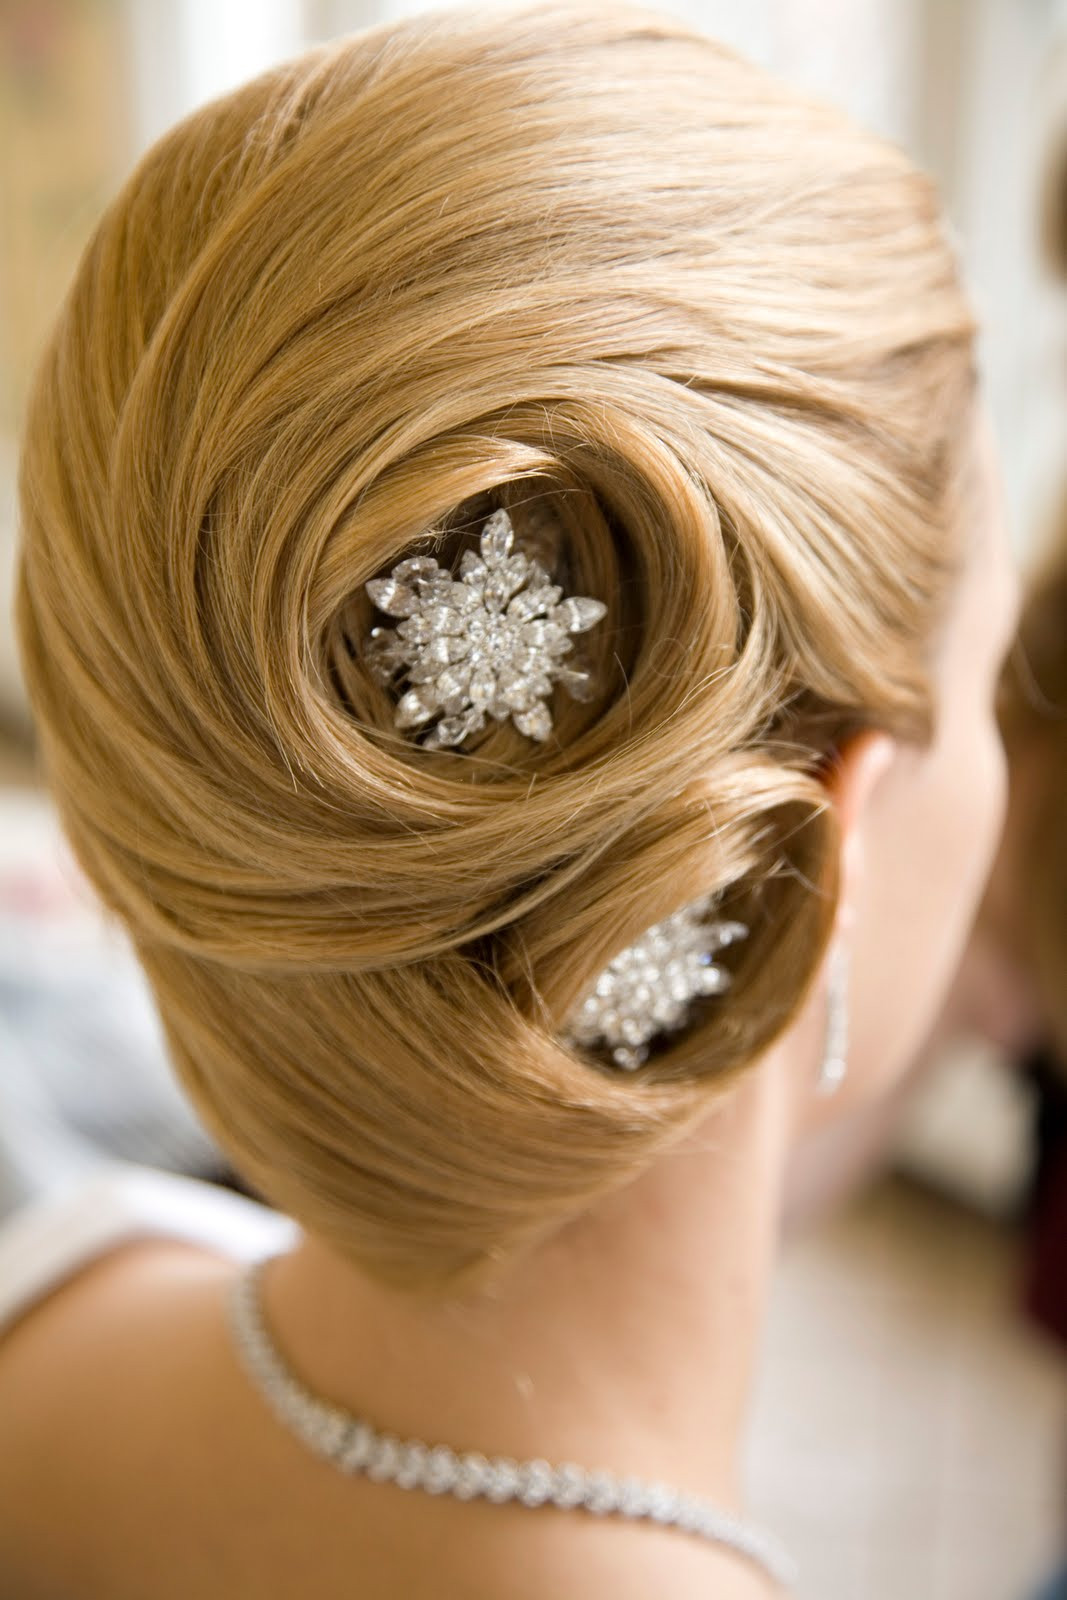 Hair Or Makeup First For Wedding
 Some Cool Bridal Hairstyles – Your Beauty First